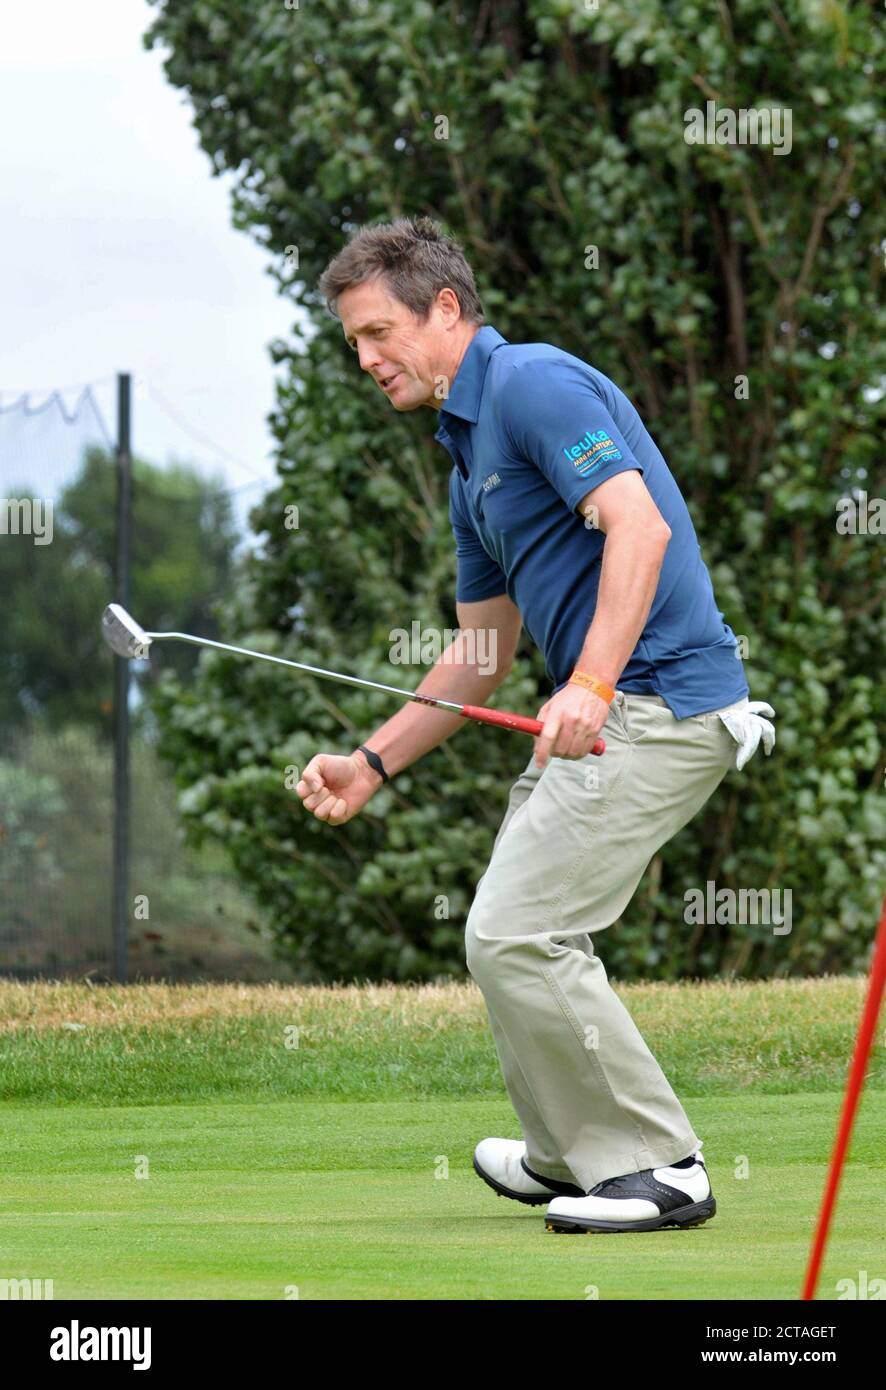 CHISWICK,LONDON,UK: JULY 16th 2010.  Actor Hugh Grant participates in the Leuka Charity Mini-Masters Golf at the Dukes Meadows Golf Course Chiswick. A Stock Photo